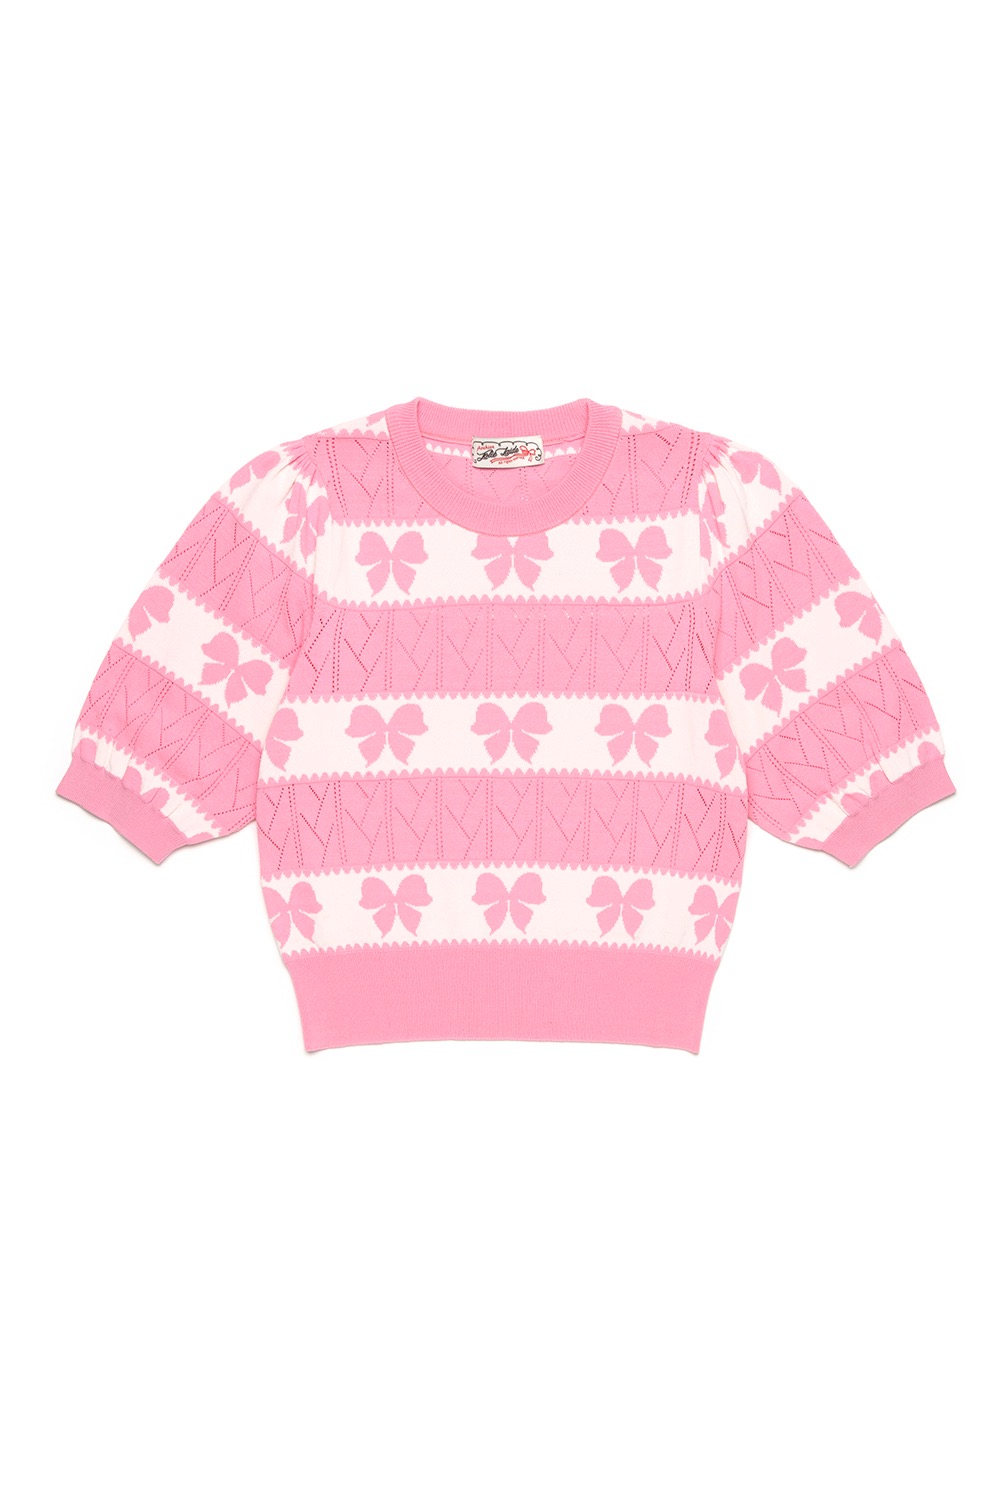 Bow summer Knit (pink)